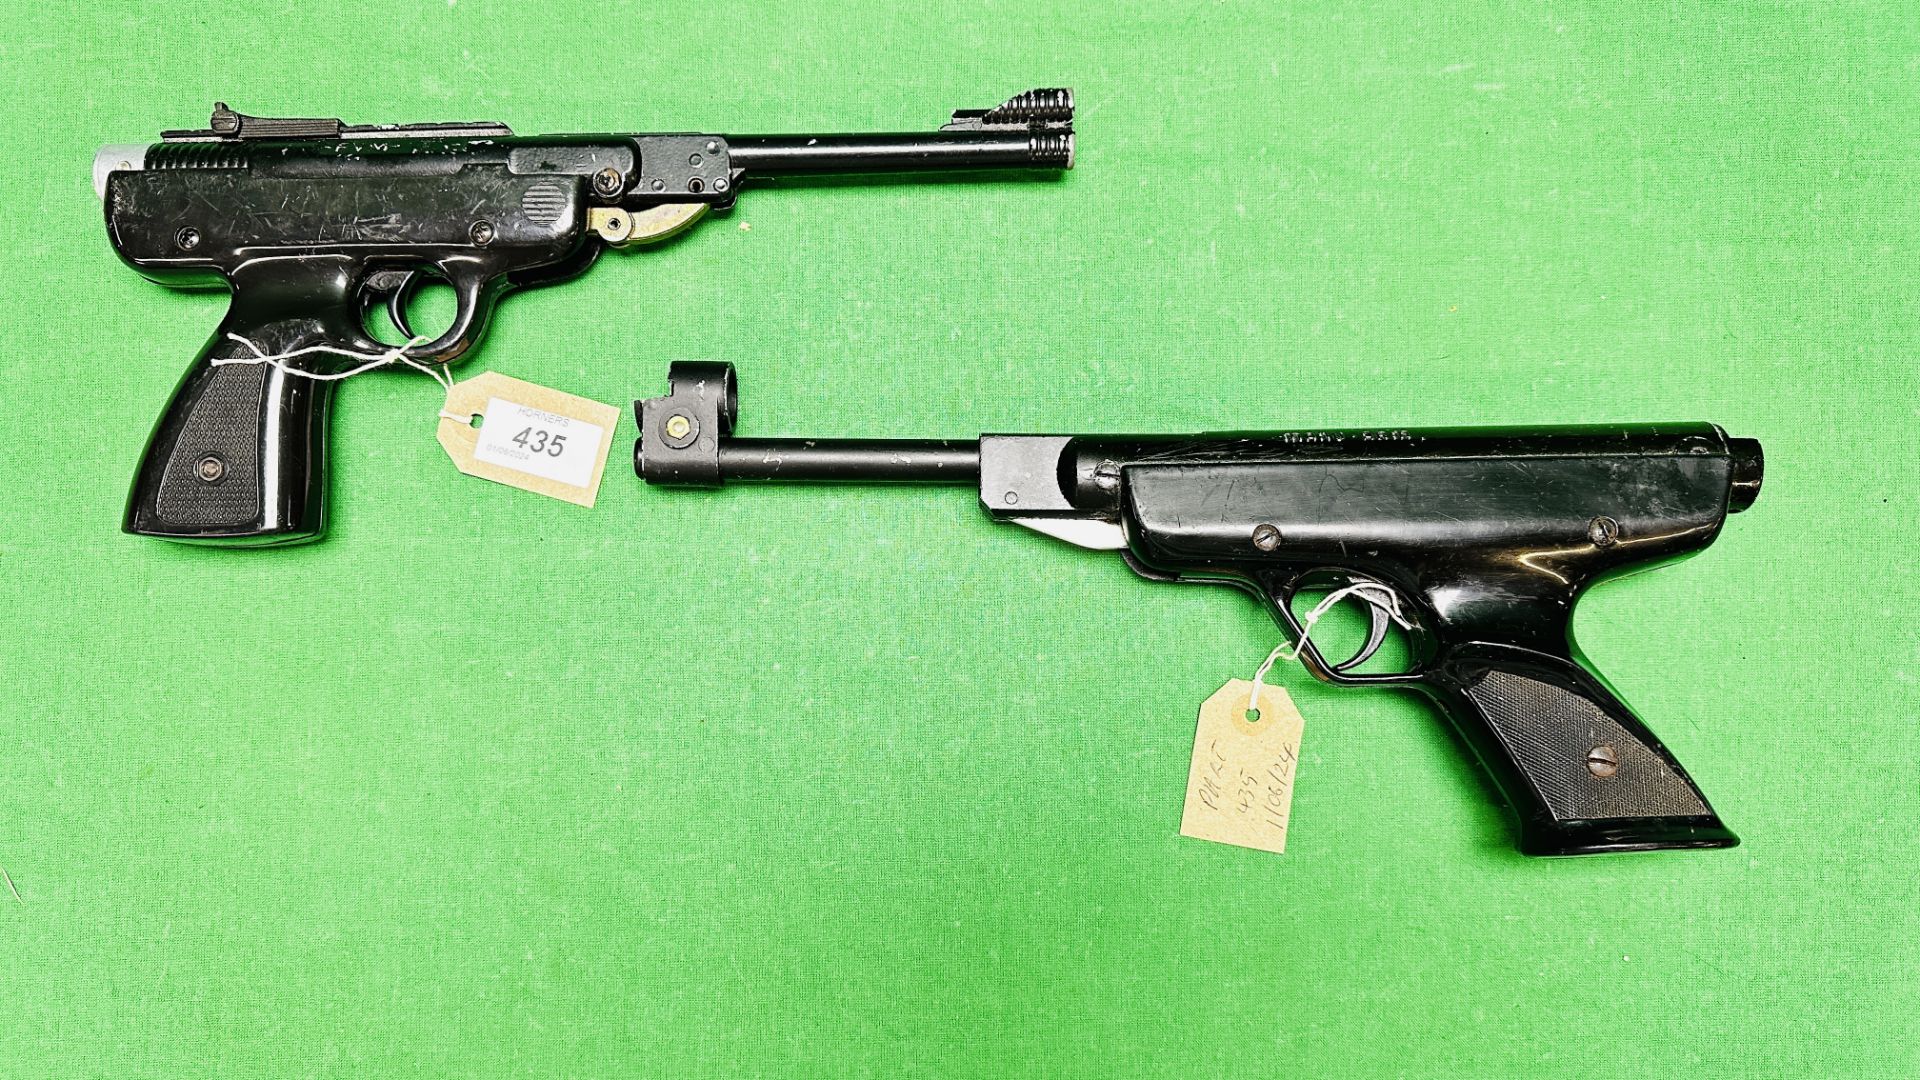 TWO VINTAGE AIR PISTOLS TO INCLUDE FRENCH MANU ARM .22 CALIBRE BREAK BARREL AND ITALIAN CONDOR .